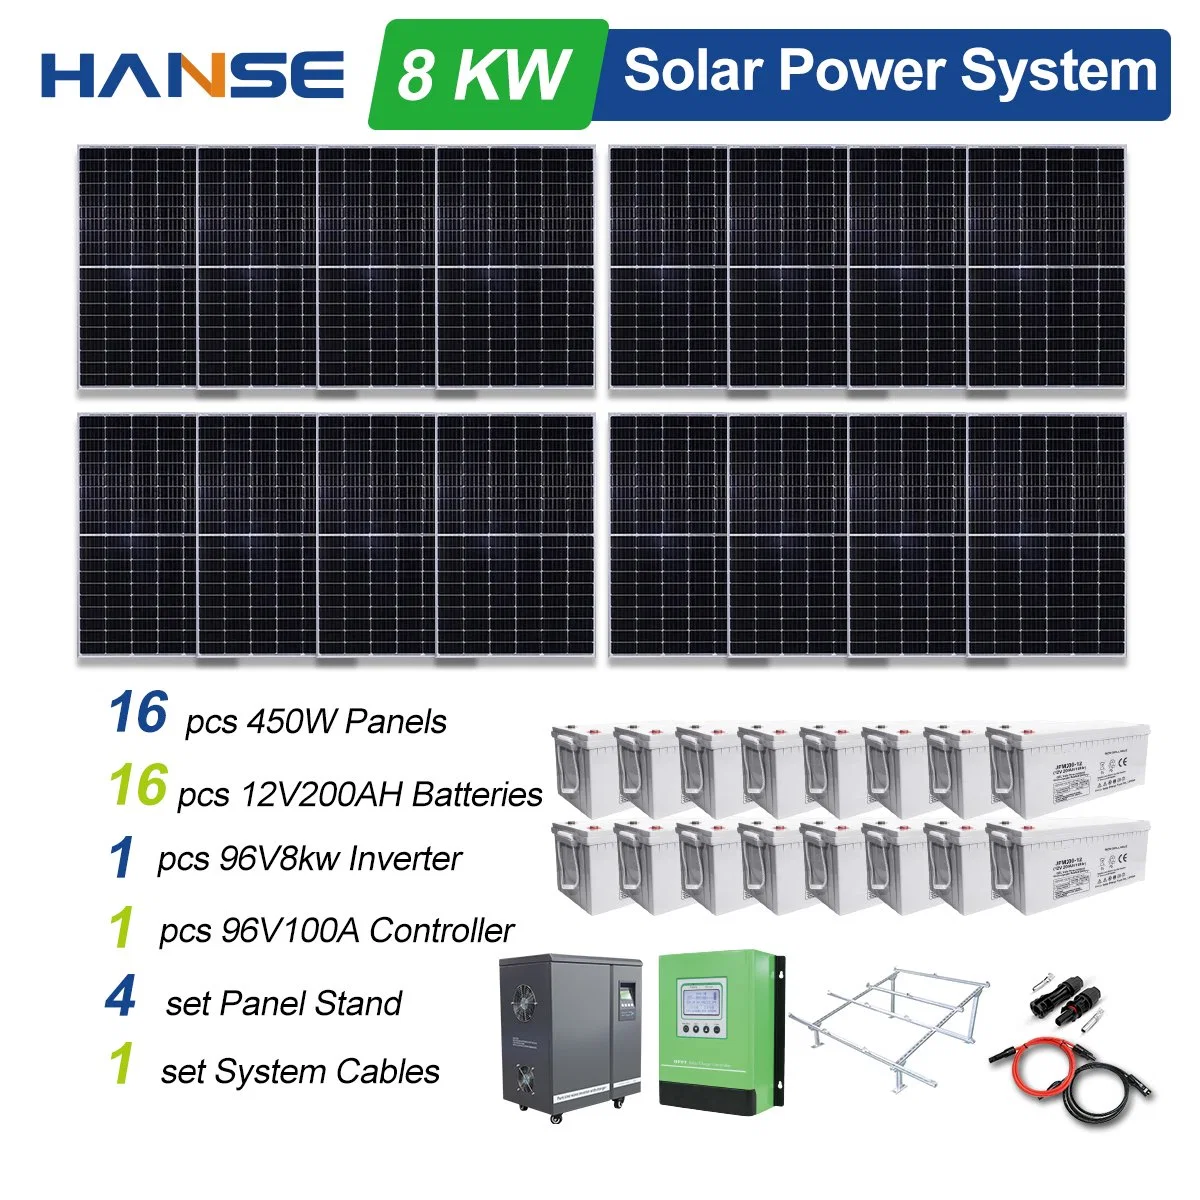 PV Photovoltaic for Wholesale Energy Panel 5kw Mini 6kw 8kw 10kw 12kw 15kw 20kw on Hybrid Complete Full off Grid Tied Home Lighting Portable Solar Power System